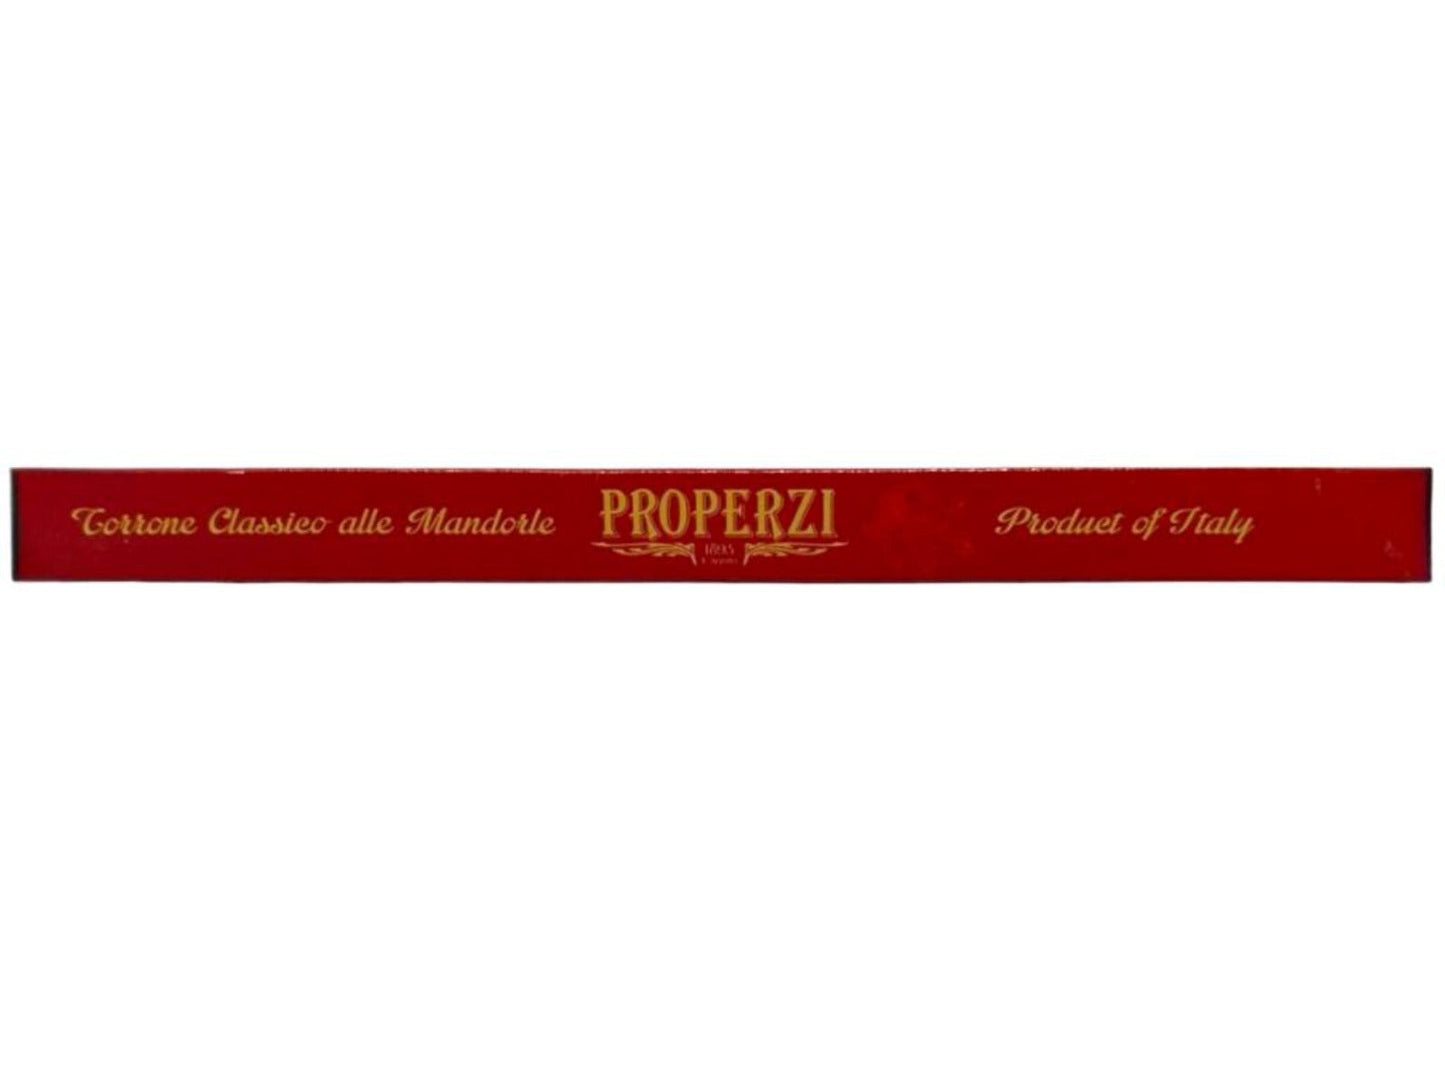 Properzi Italian Classic Nougat Candy With Almonds 200g - 2 Pack Total 400g Best Before end of Feb 2025